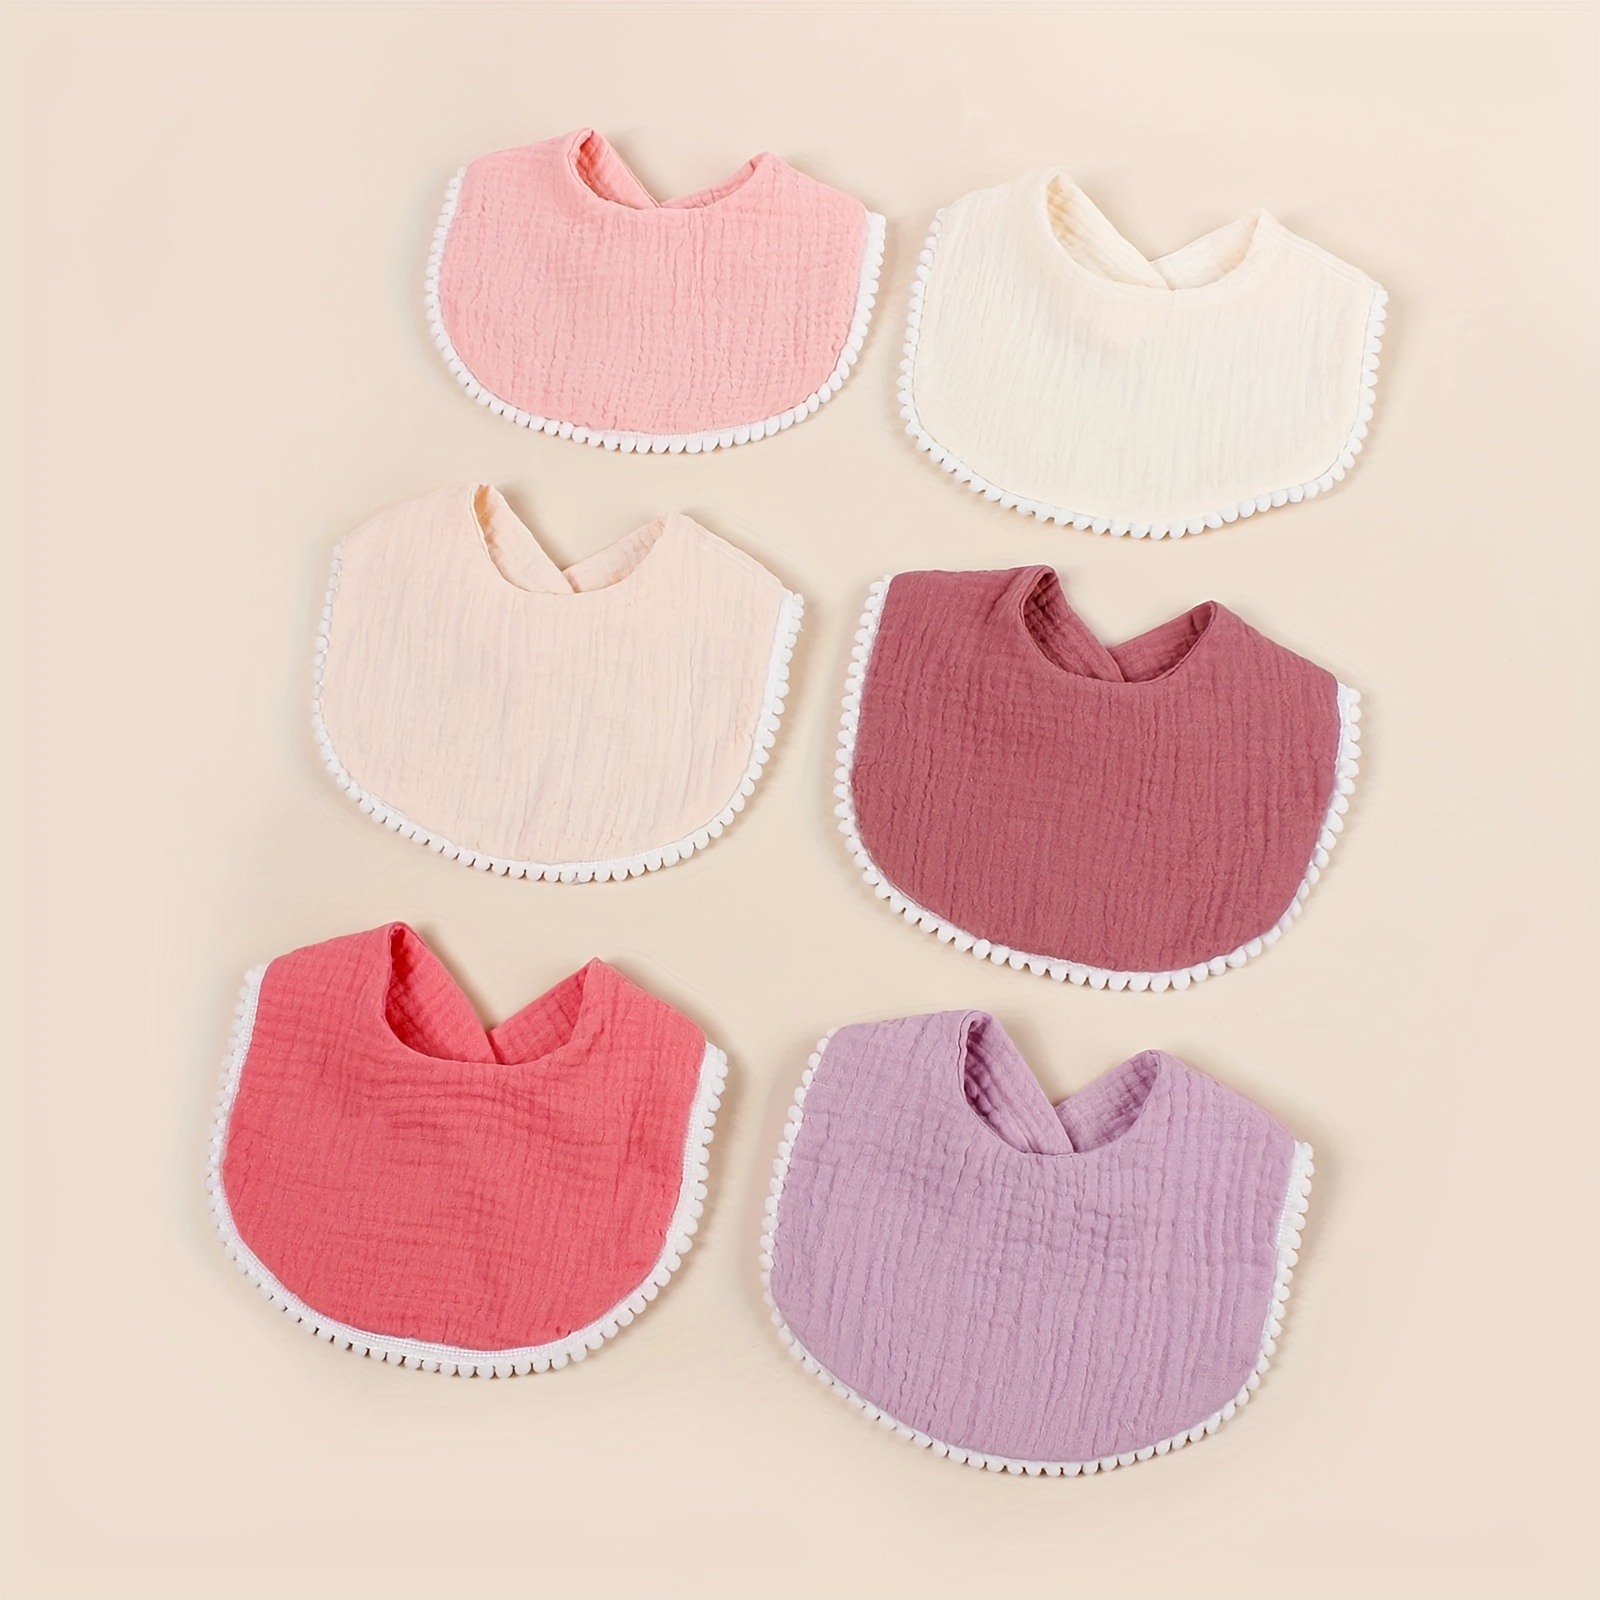 

6pcs Soft Cotton Baby Bibs With Cute Pom Poms - Solid Colors, Snap Closure, Perfect For 0-3 Years Solid Color Baby Bibs With Plastic Backing Linen Baby Bibs